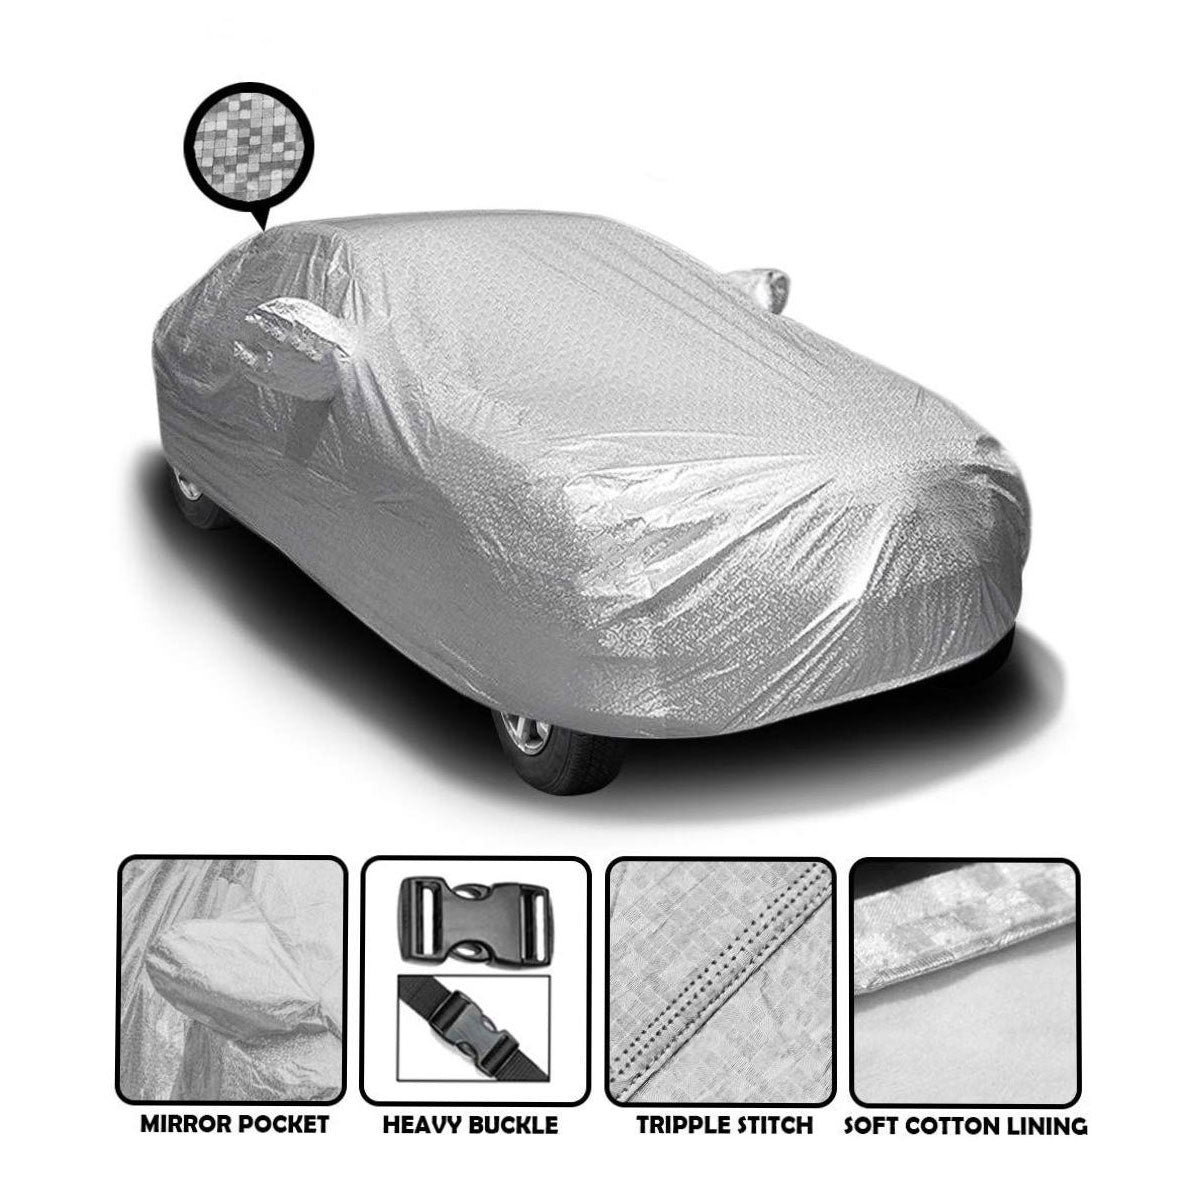 Oshotto Spyro Silver Anti Reflective, dustproof and Water Proof Car Body Cover with Mirror Pockets For Hyundai i10 Nios